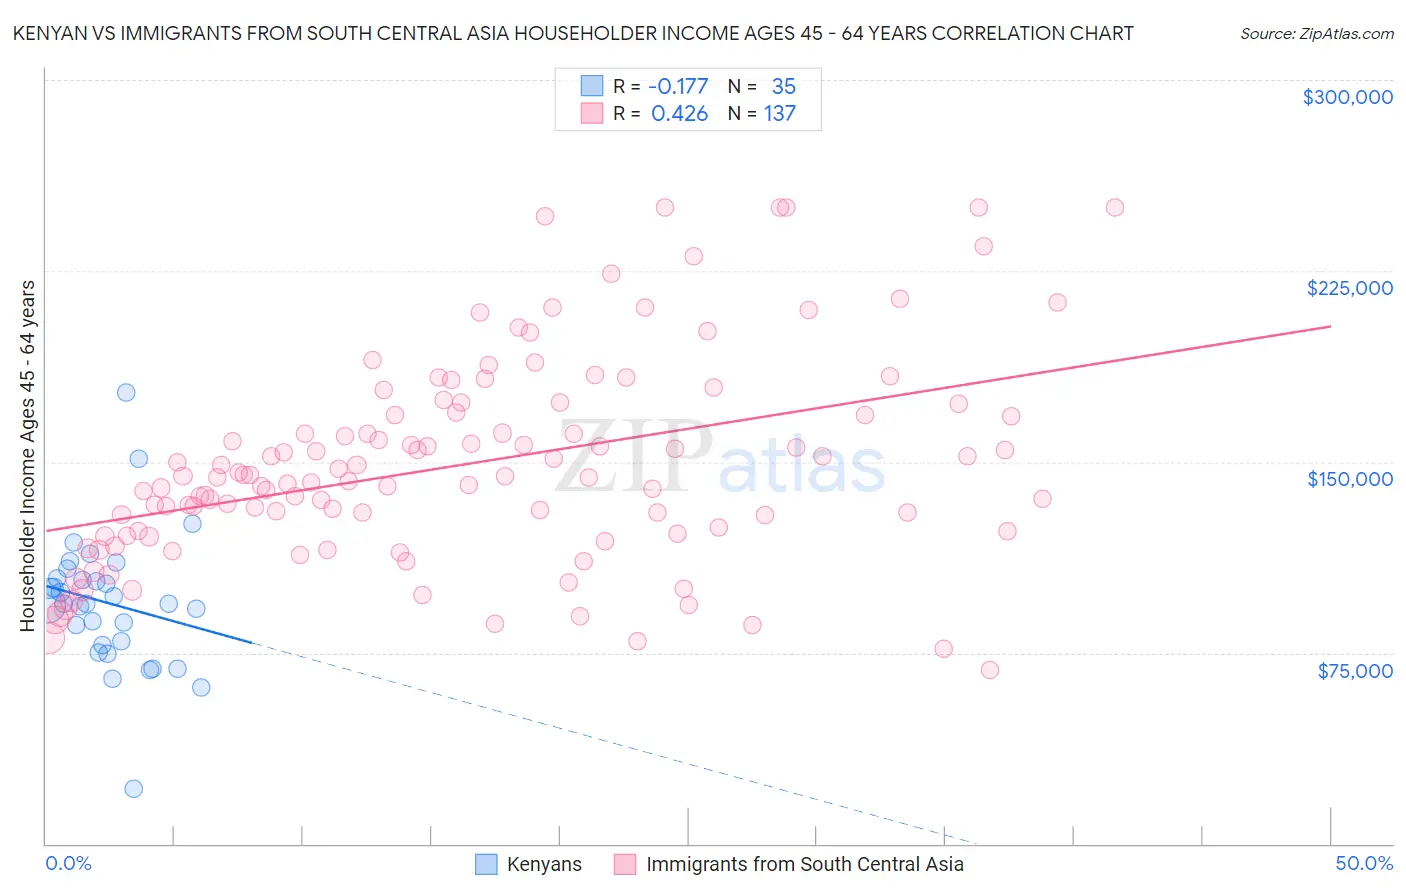 Kenyan vs Immigrants from South Central Asia Householder Income Ages 45 - 64 years